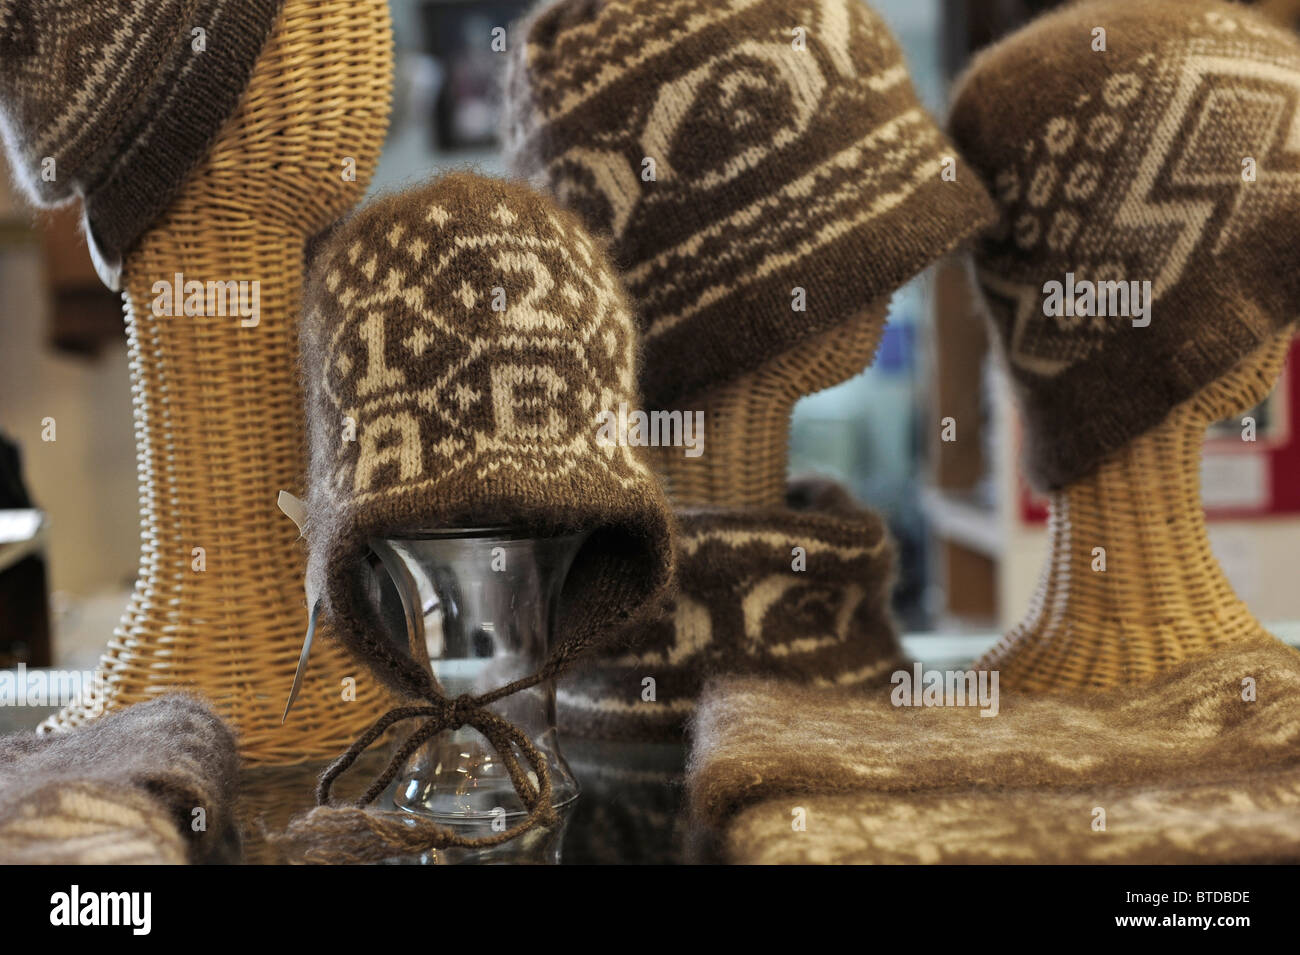 Display of hand knitted Qiviut hats at the Oomingmak Musk Ox Producers' Co-operative in Downtown Anchorage,  Alaska Stock Photo